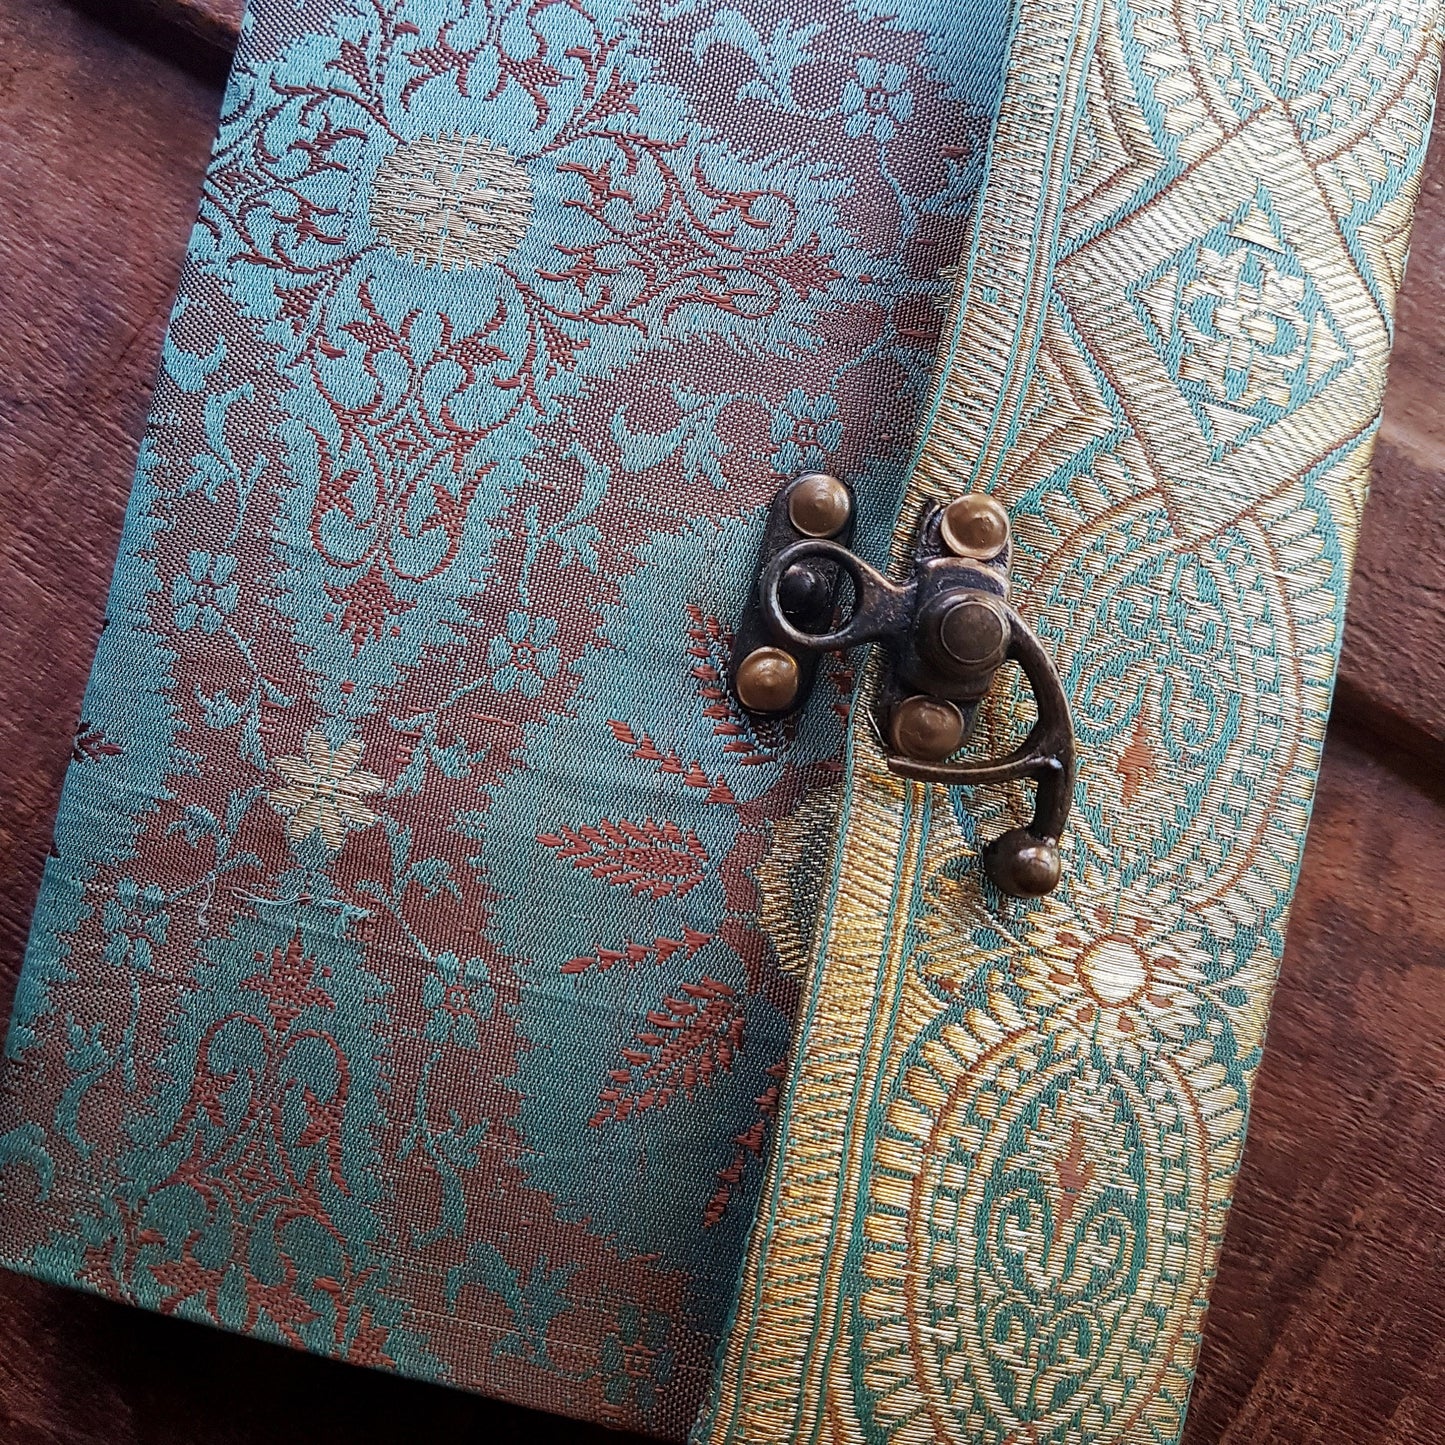 Vintage fabric sketchbook journal 5 by 7 inches. One of a kind blank book with artisan paper pages. Medieval look bronze metal lock closure. - Vintage India Ca